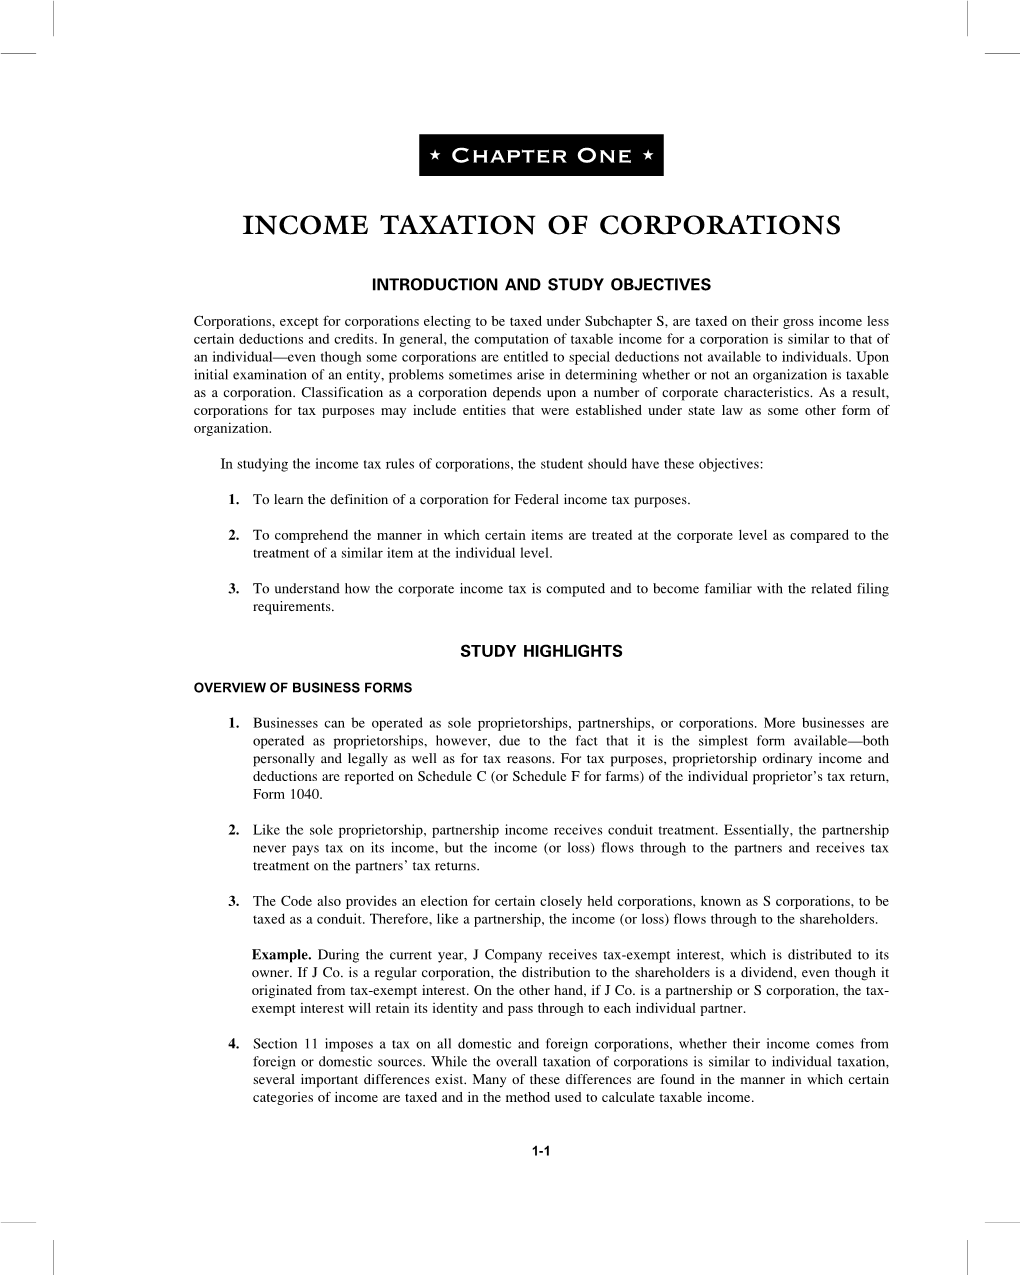 Income Taxation of Corporations